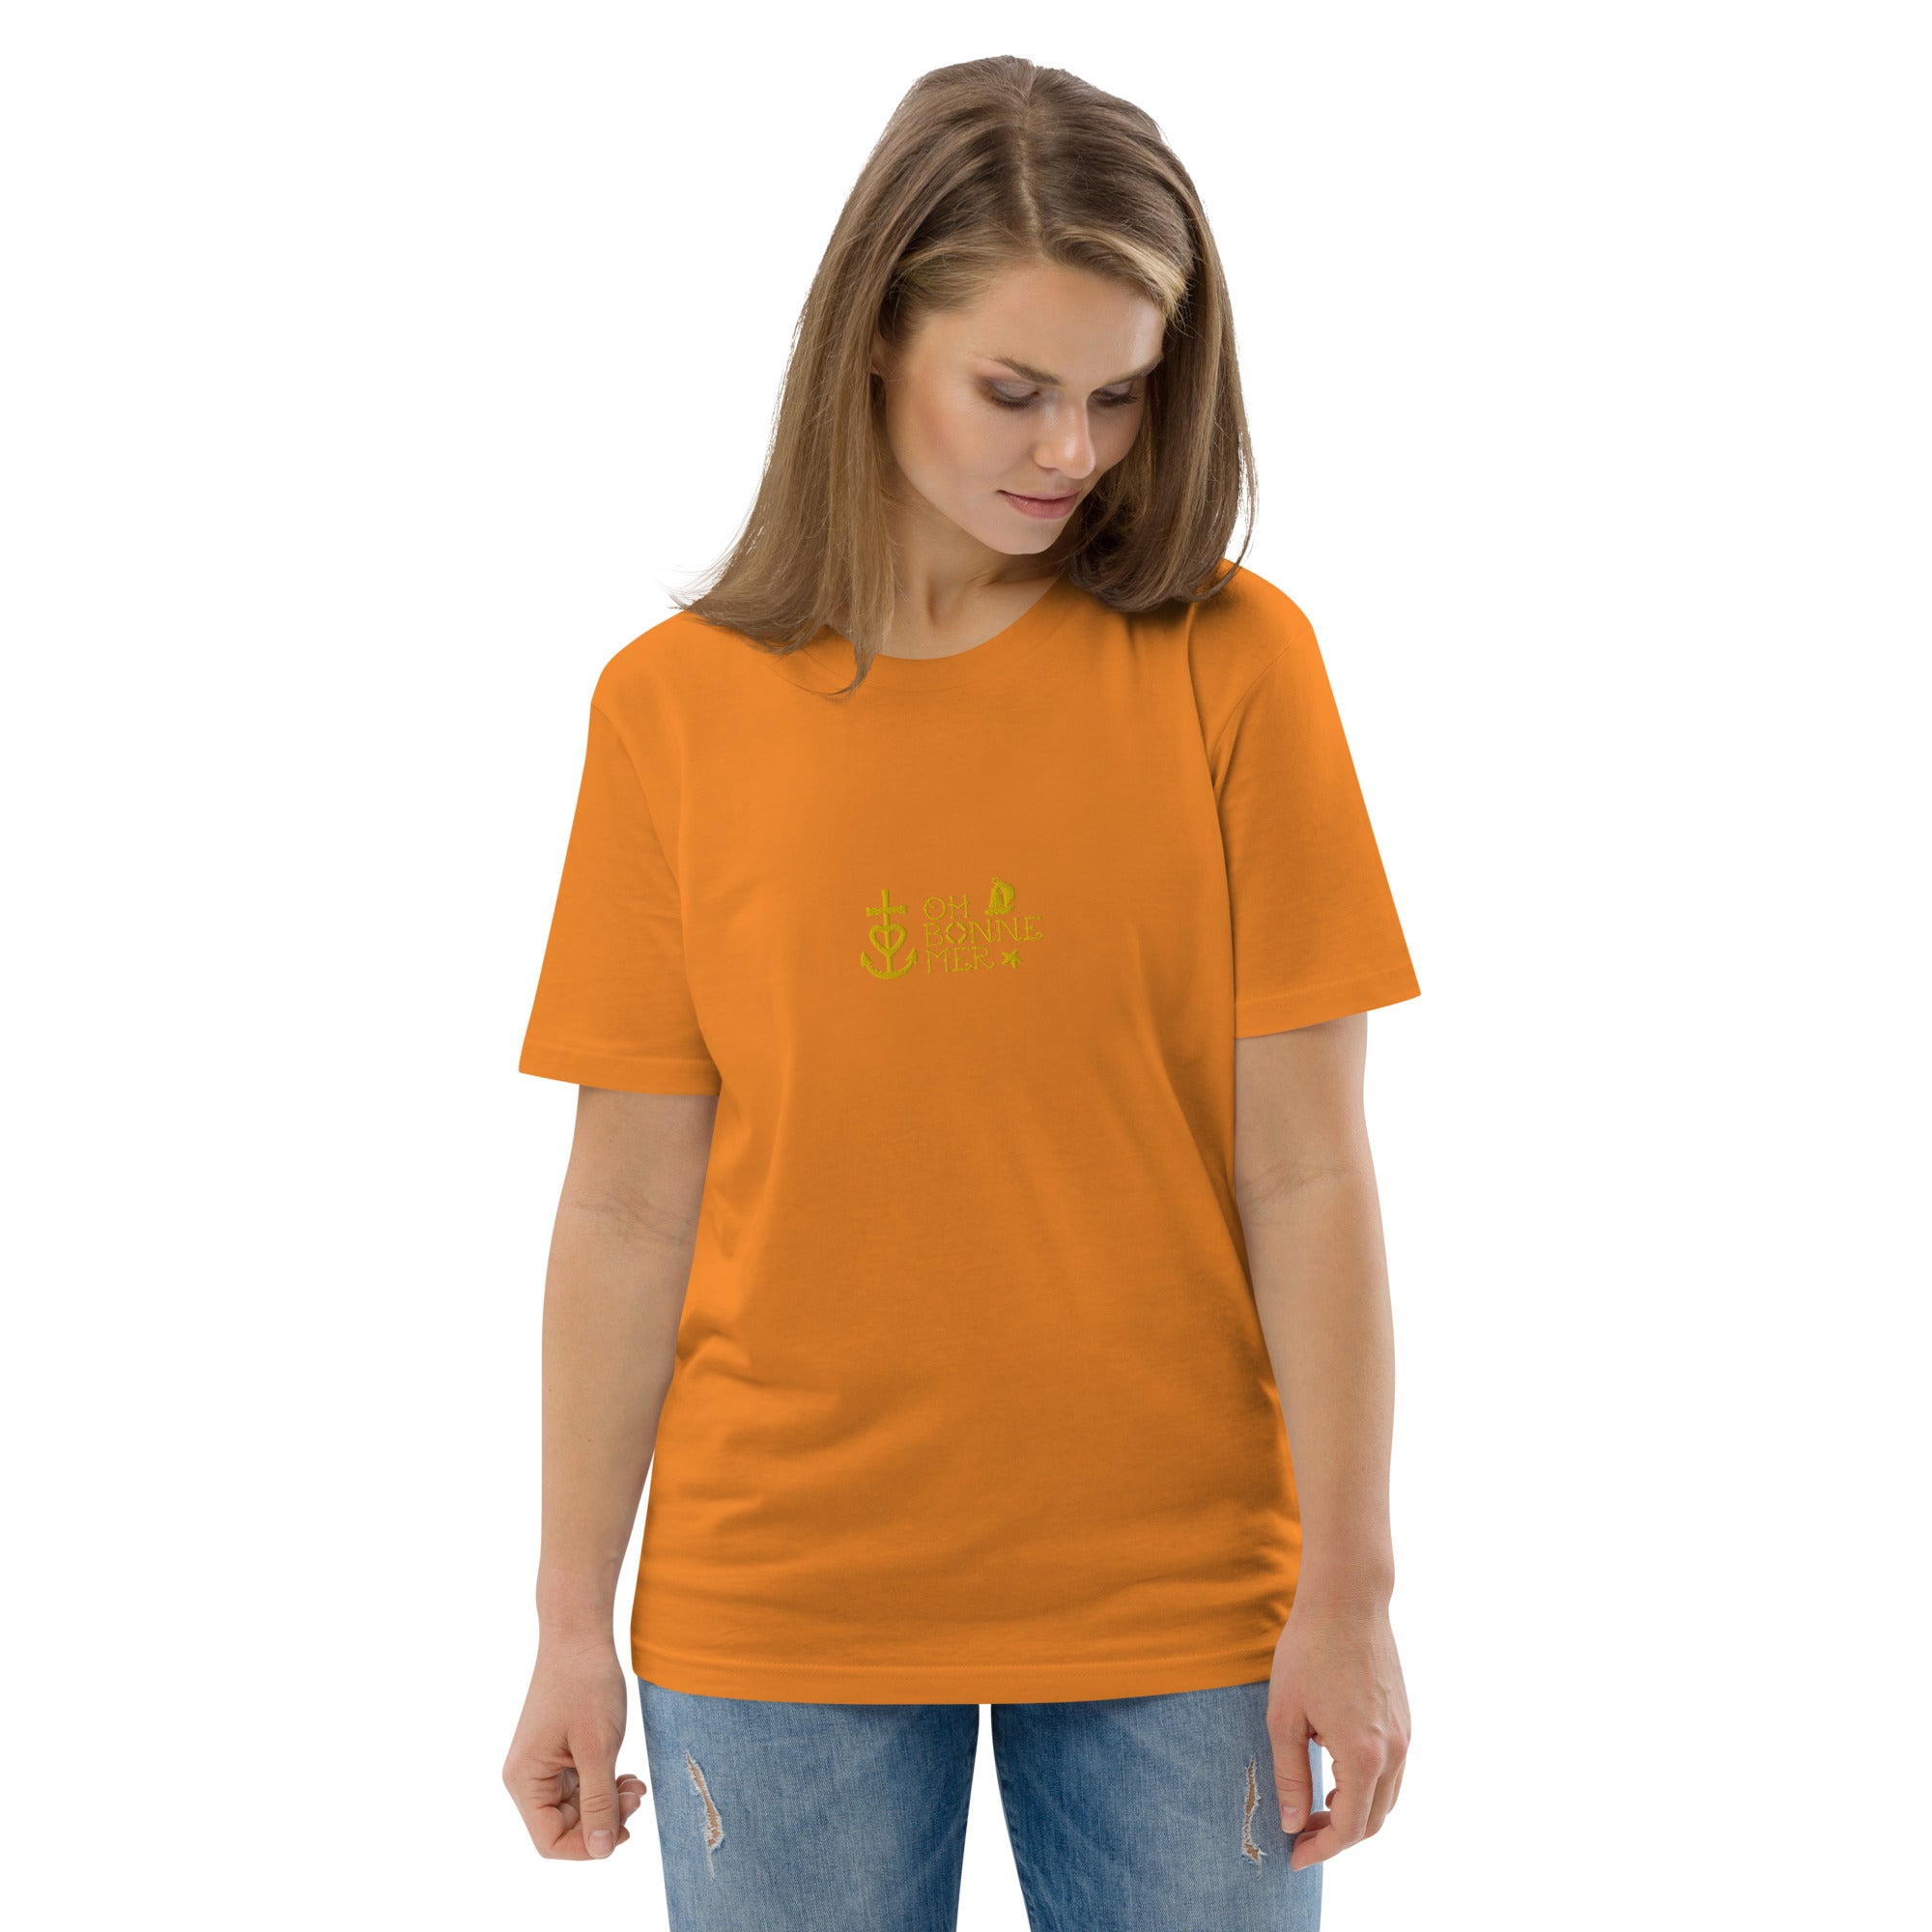 Unisex organic cotton t-shirt Oh Bonne Mer 2 embroidered pattern on bright colors